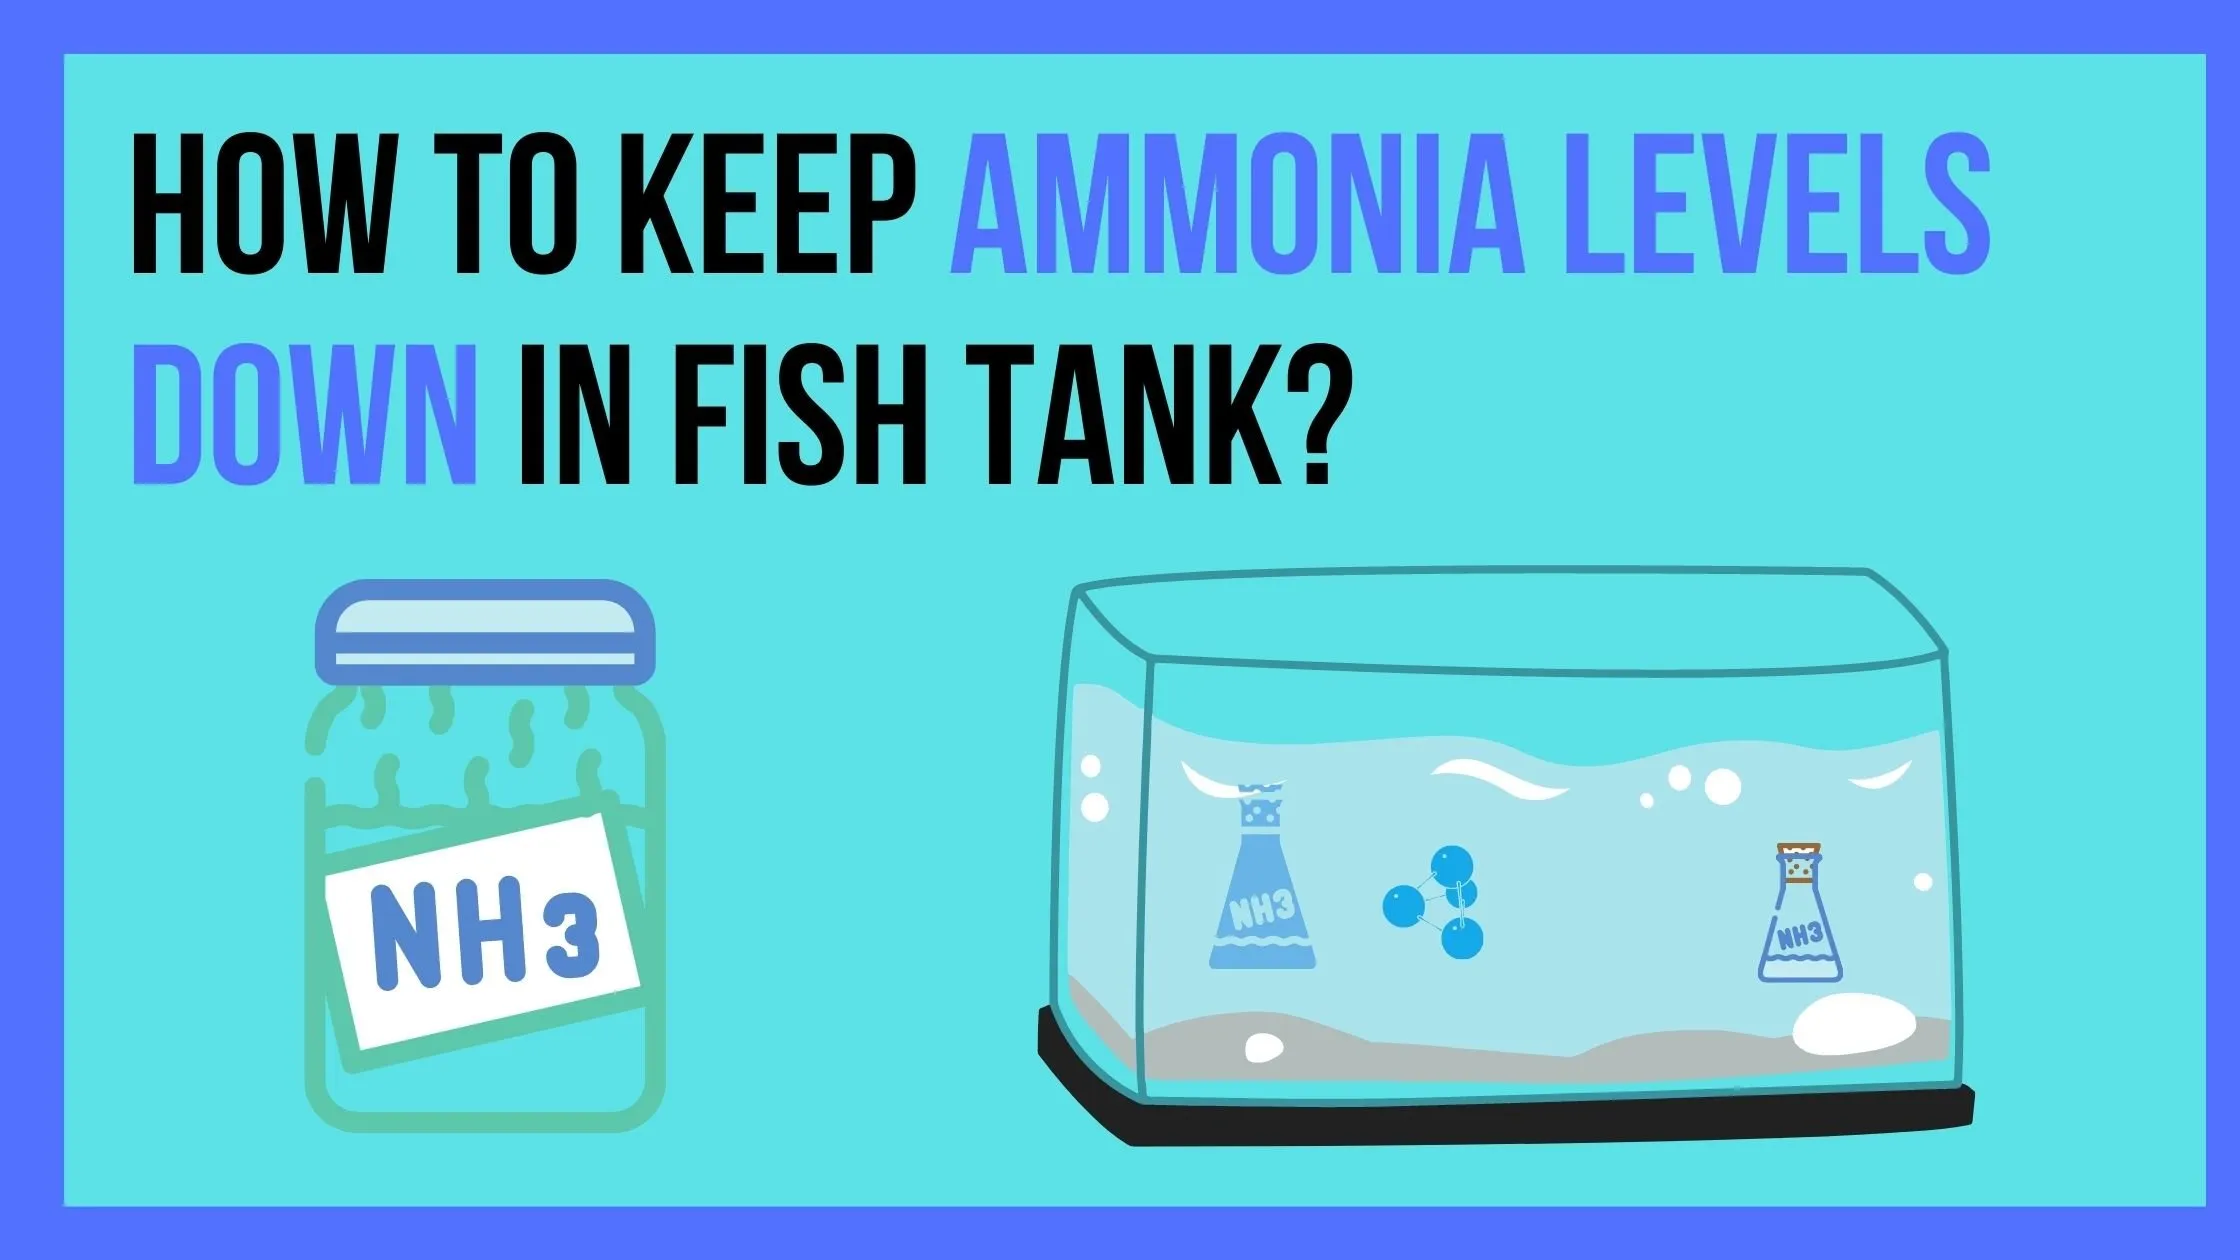 How to Keep Ammonia Levels Down in Fish Tank